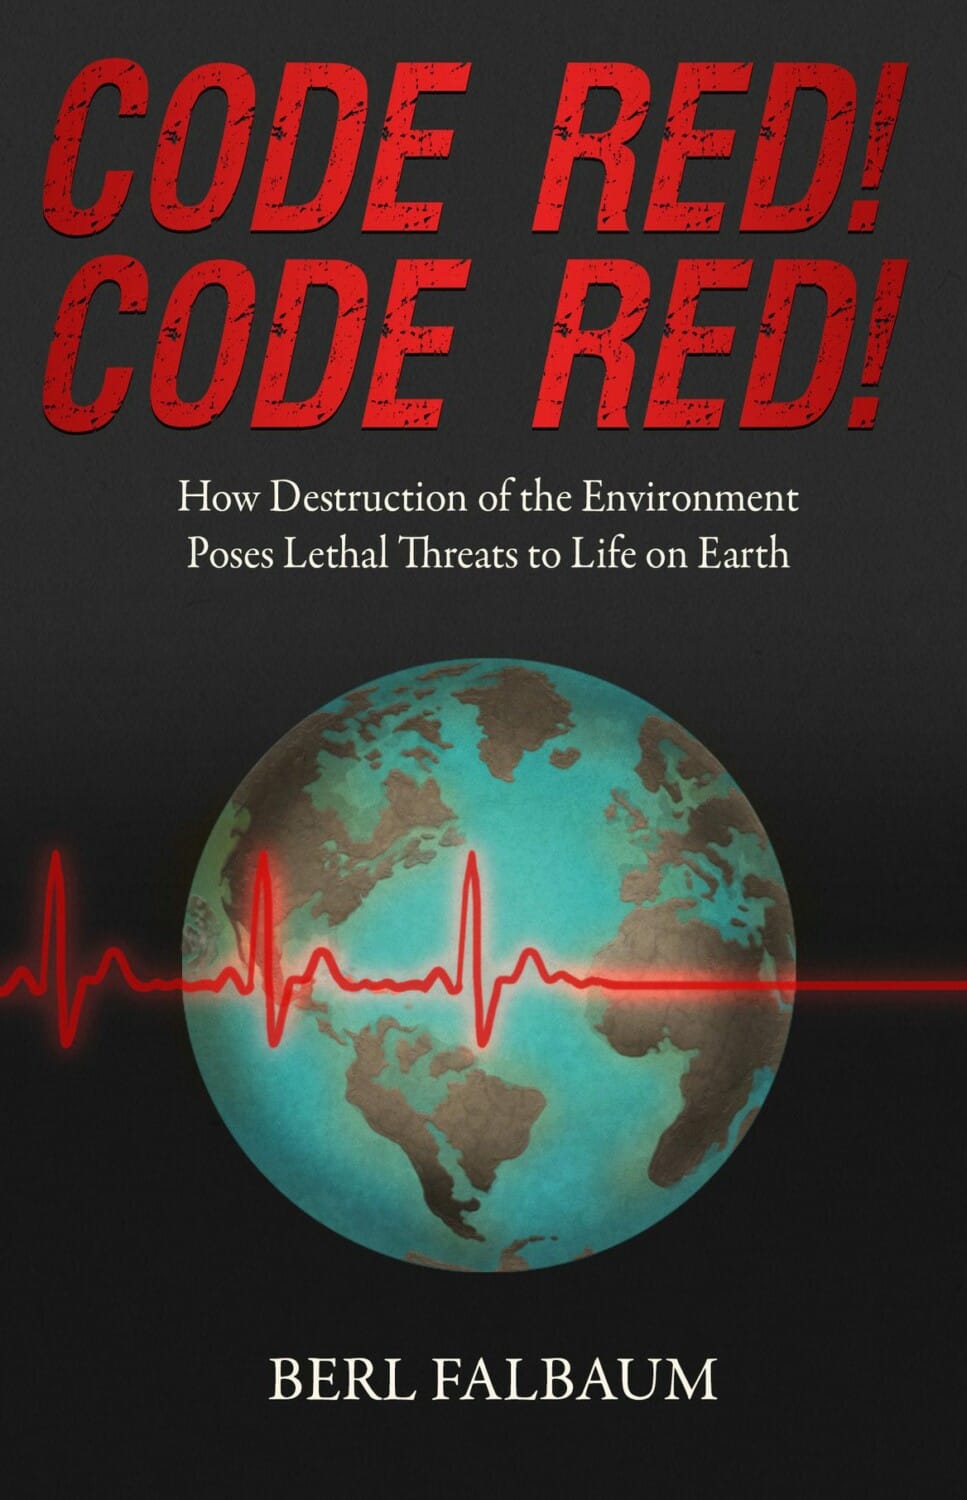 1Code Red Final Cover 1